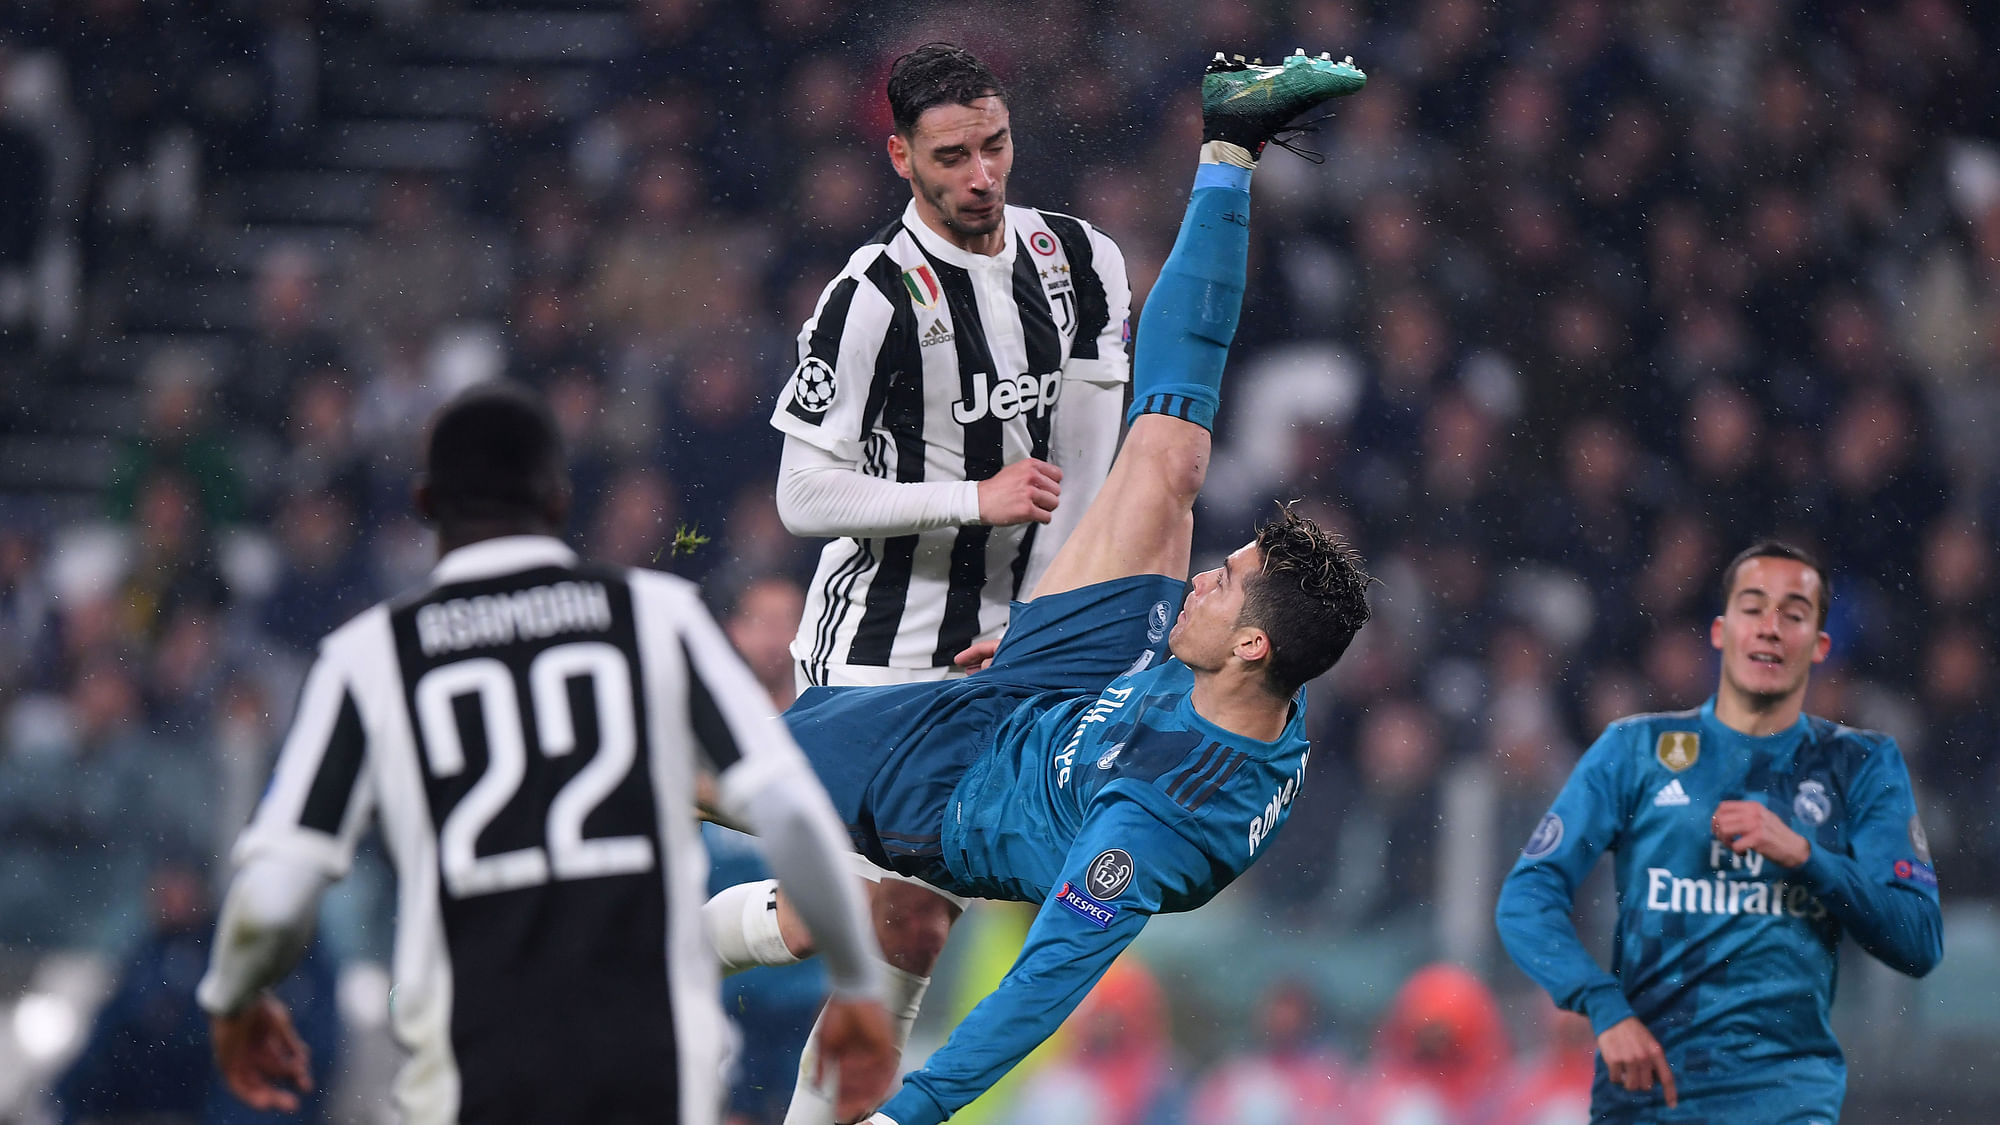 Cristiano Ronaldo scored with a bicycle kick against Juventus the last time the teams met.